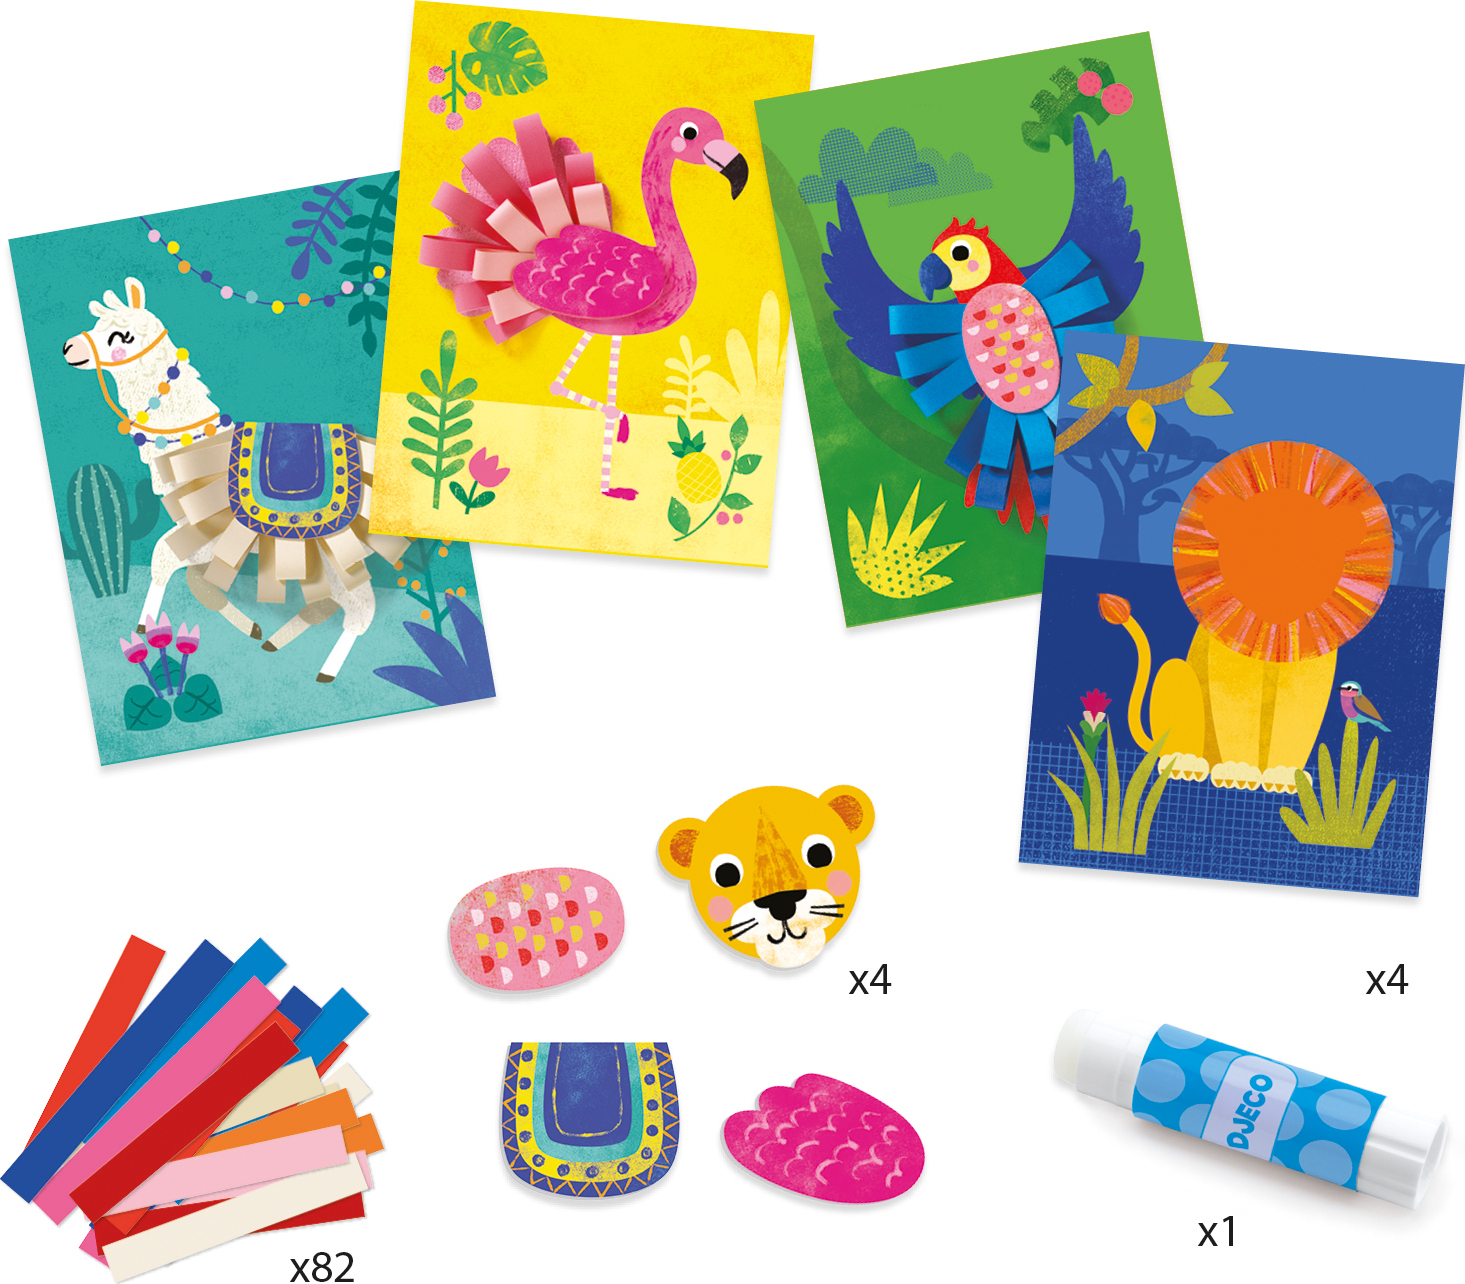 Petit Collage DIY Arts and Crafts Kit, Stationery Design – Craft Kit for  Kids Includes 12 Animal Notecards, 1 Blank Journal, 2 Sticker Sheets, 4